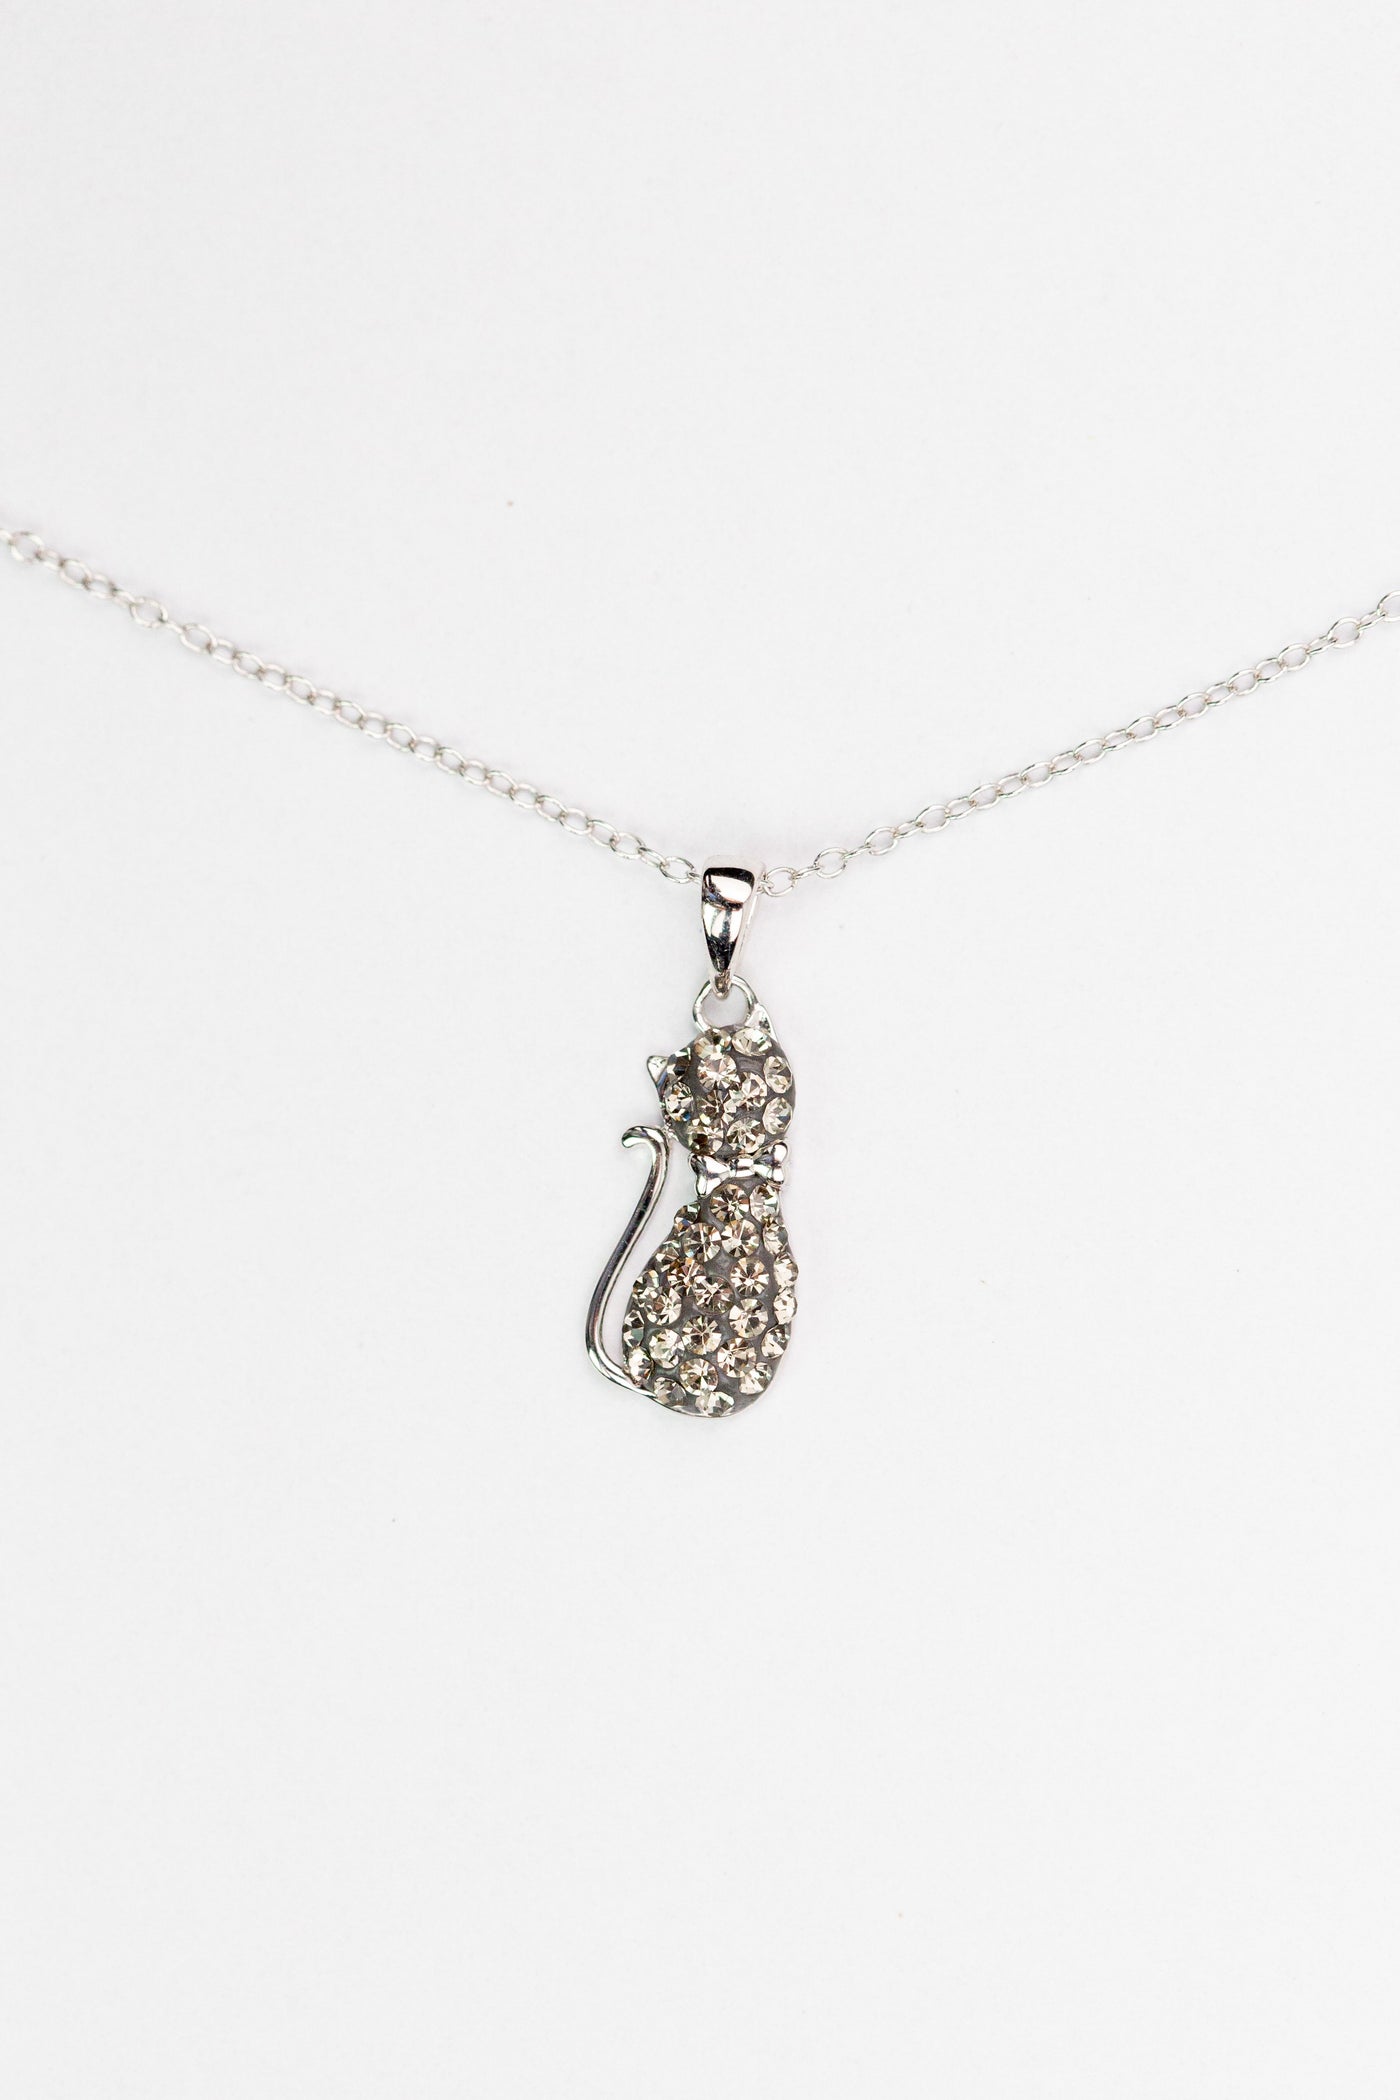 Gray Cat Necklace Crystal Cat Silver Pendant Necklace in Black Diamond Crystal | Annie and Sisters